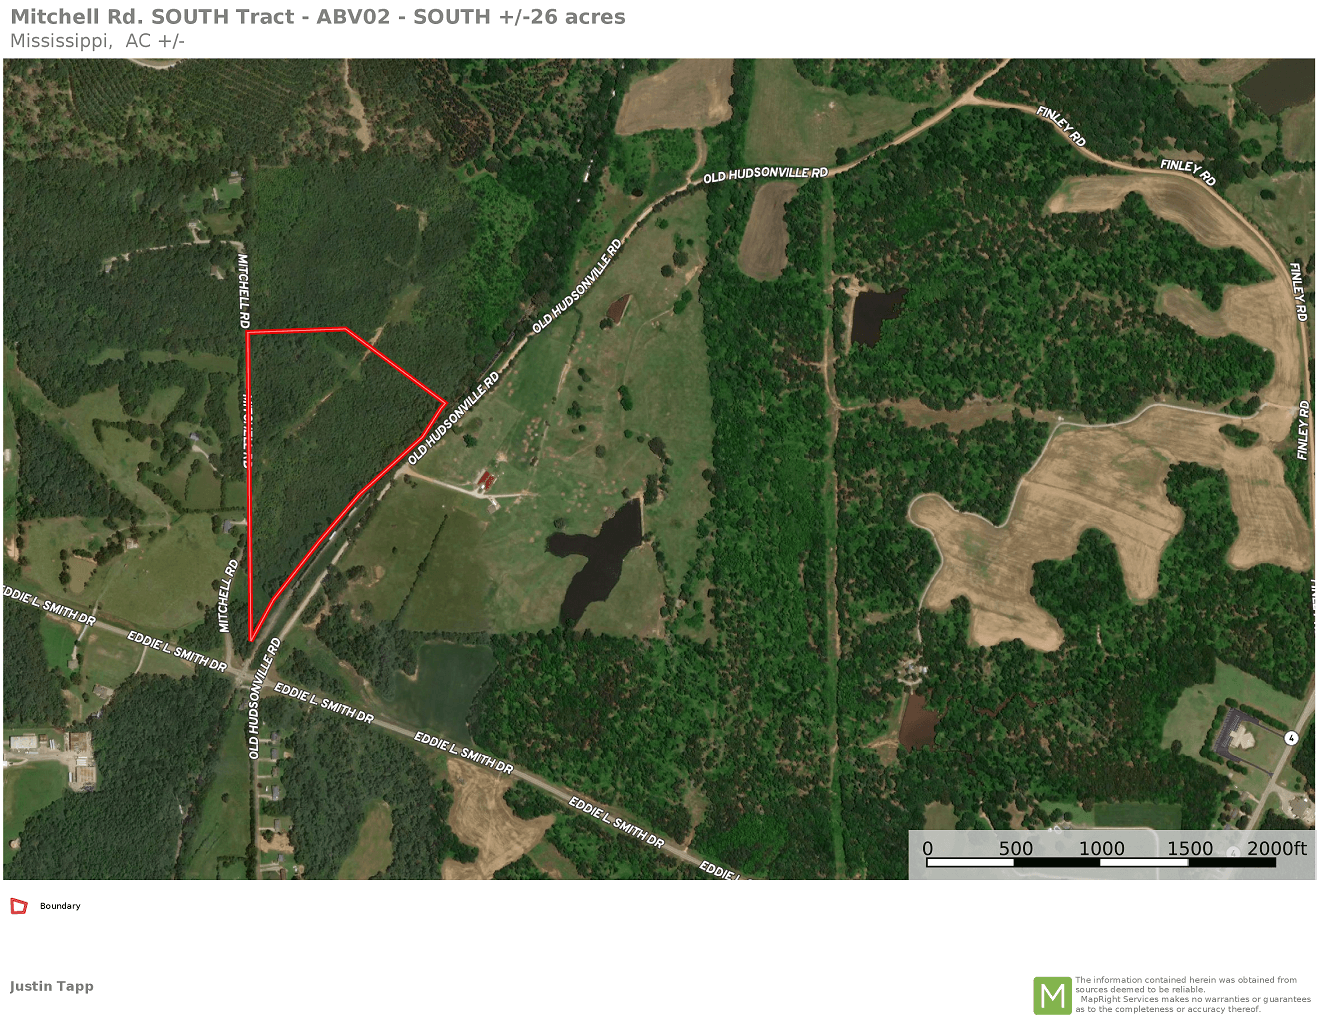 13 Aerial Map ABV02 SOUTH 26 acres.png